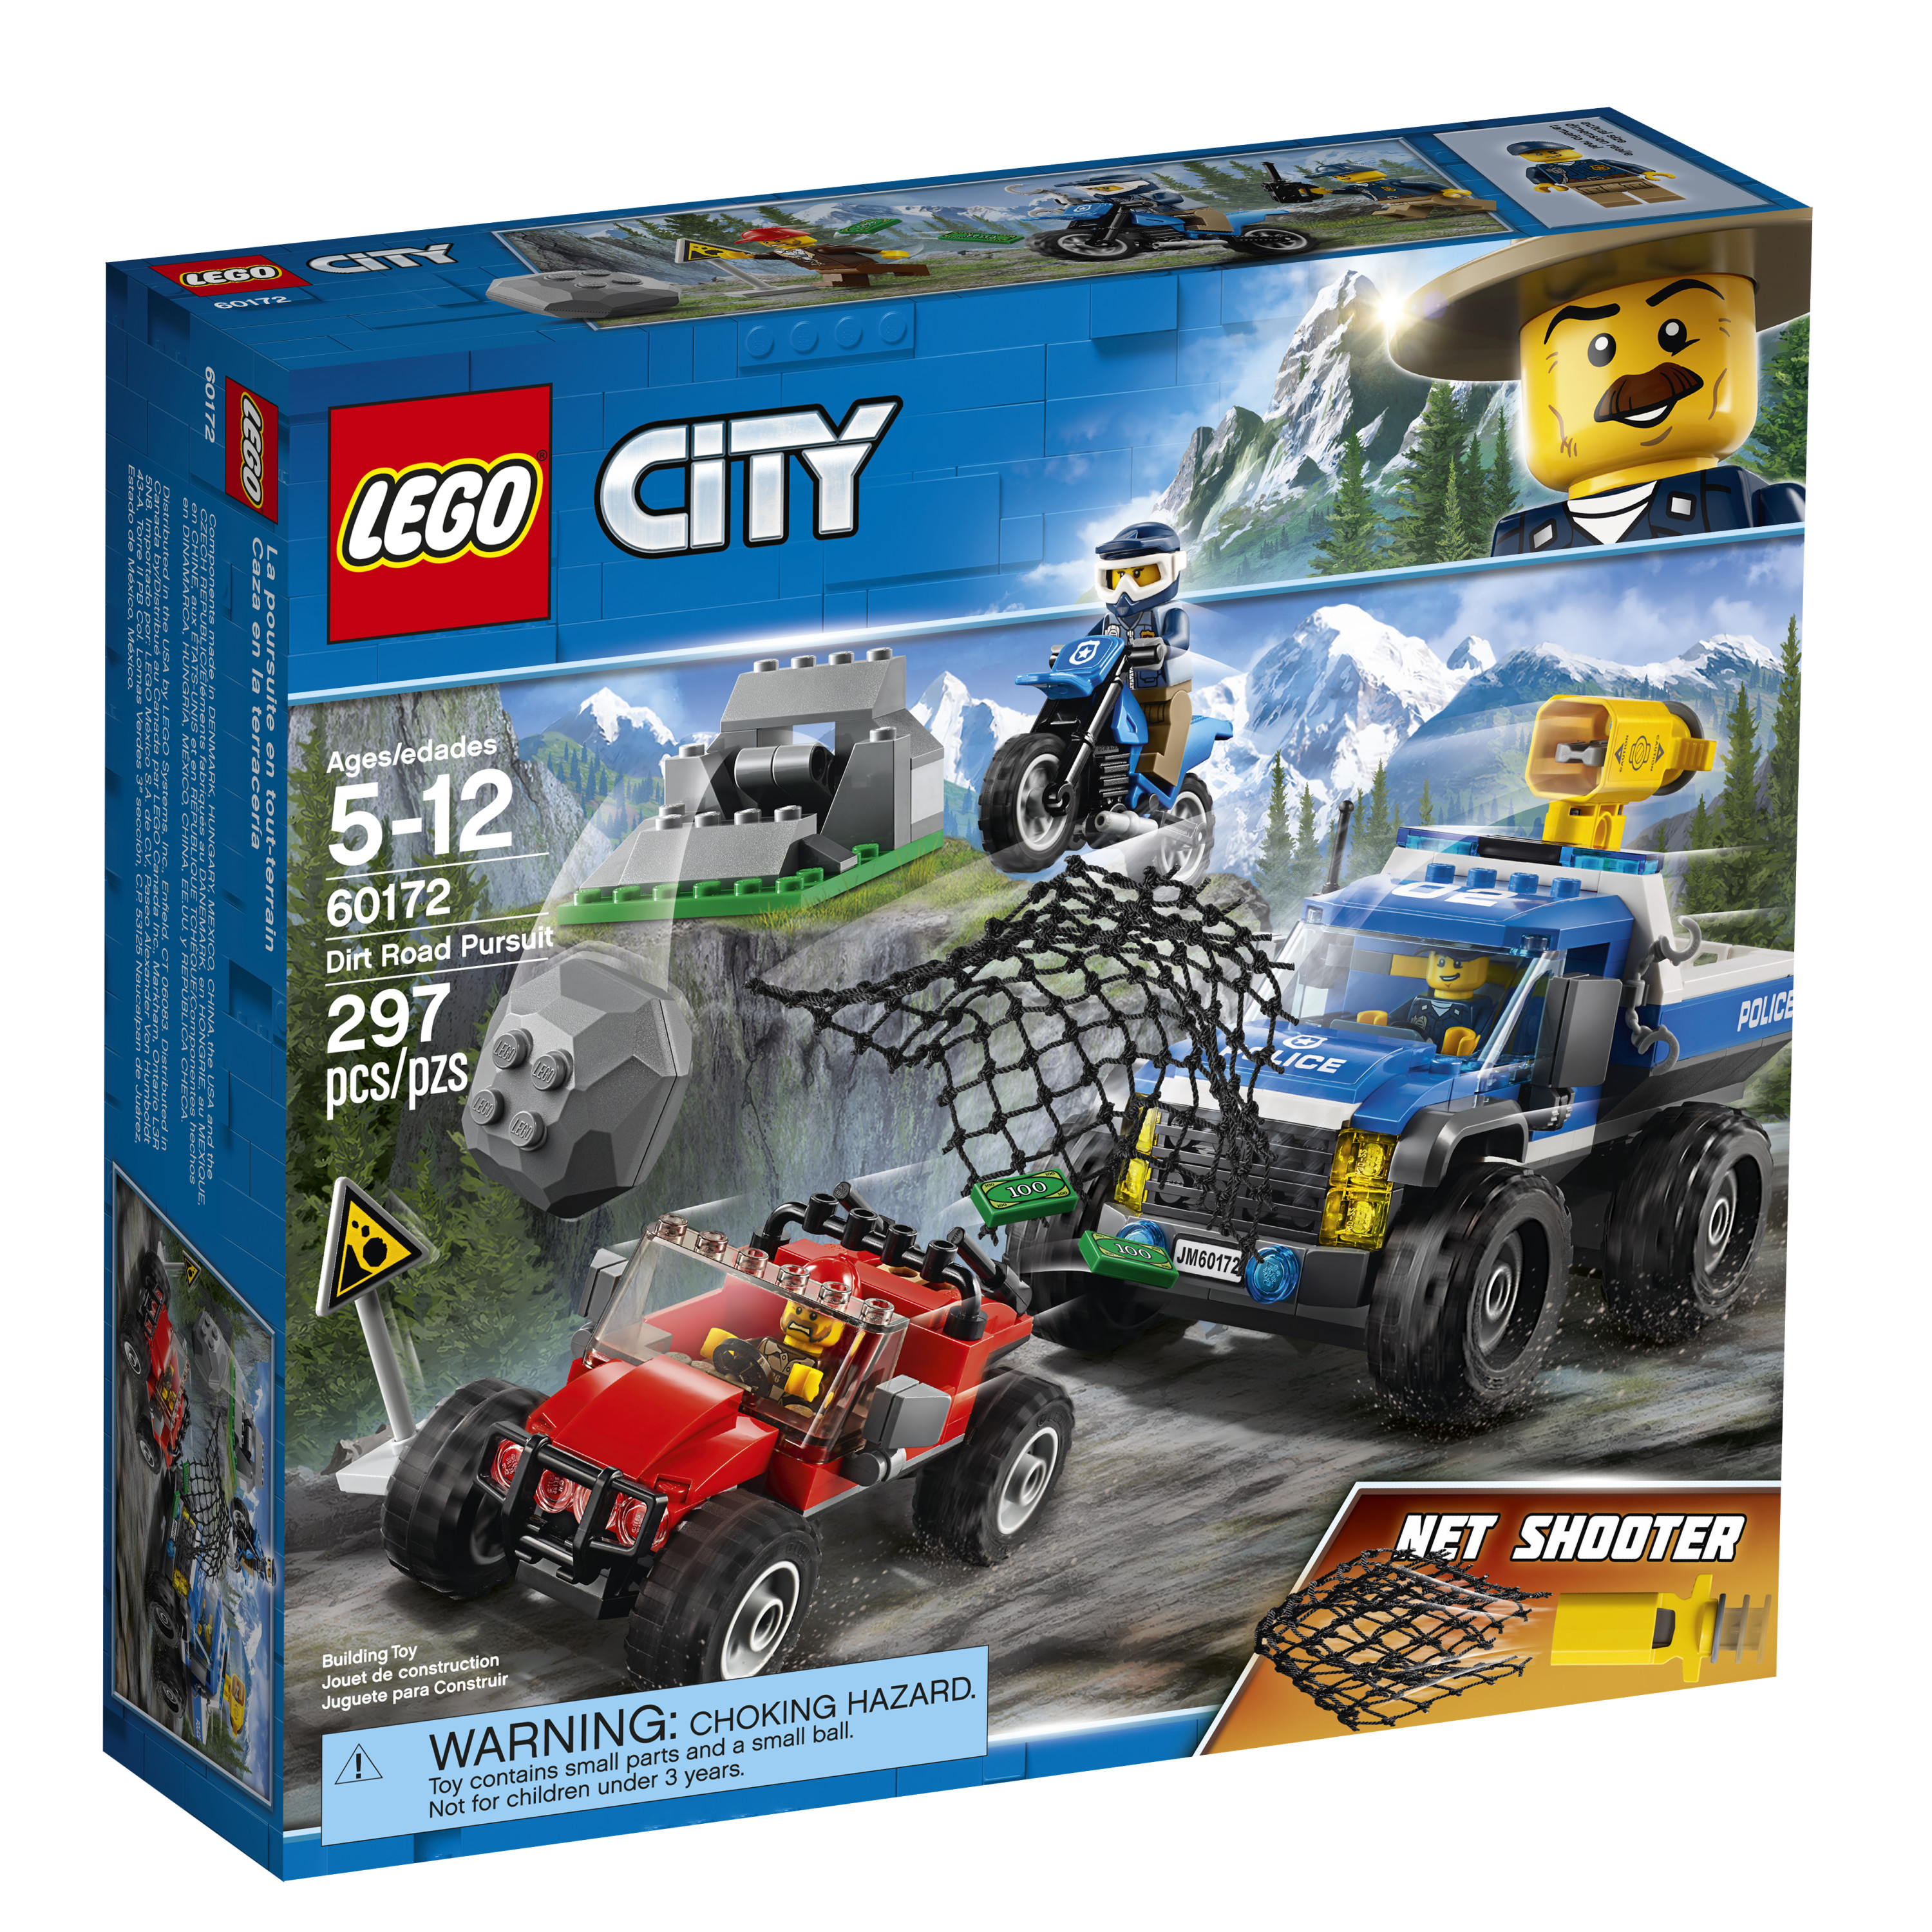 LEGO City Police Dirt Road Pursuit 60172 - image 4 of 5